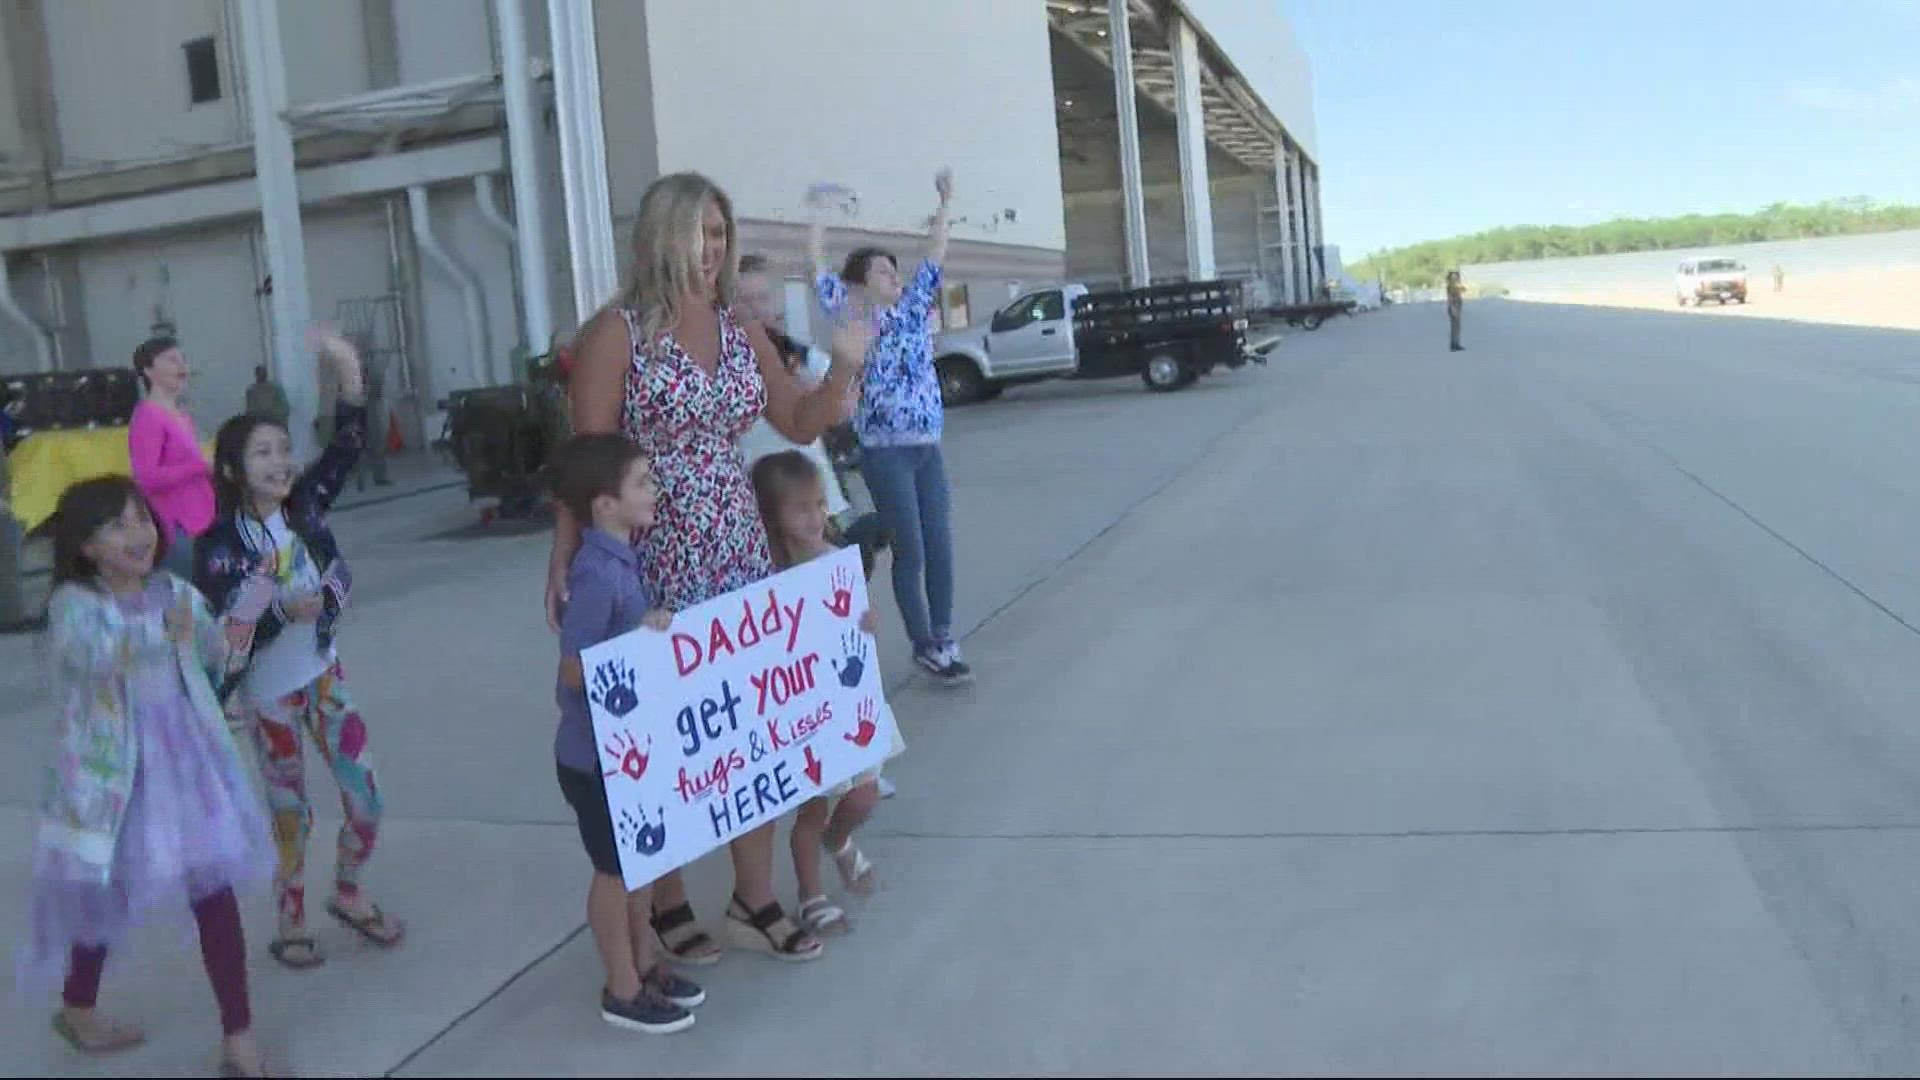 There was a joyous reunion as Servicemen arrived home to NAS Jax Monday.